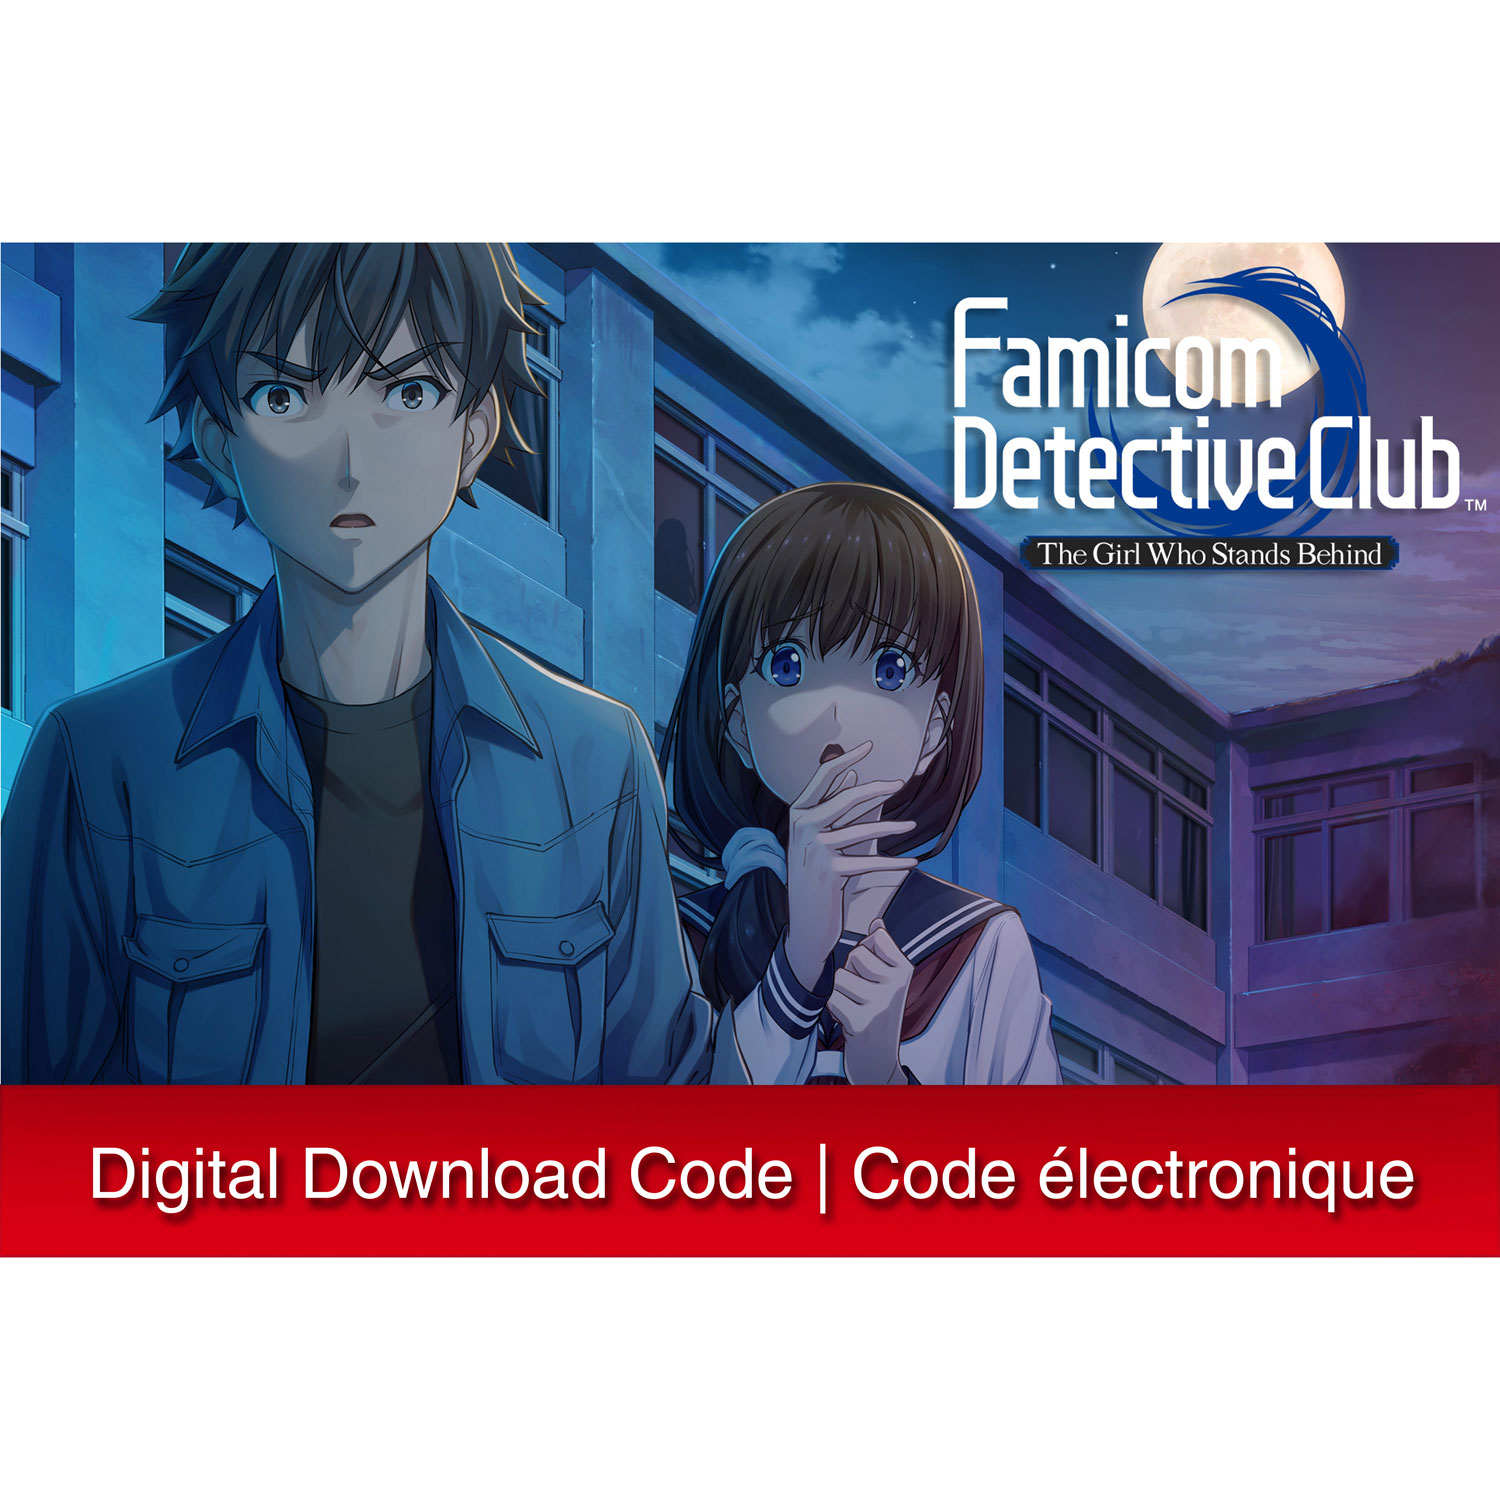 Famicom Detective Club: The Girl Who Stands Behind (Switch) - Digital Download